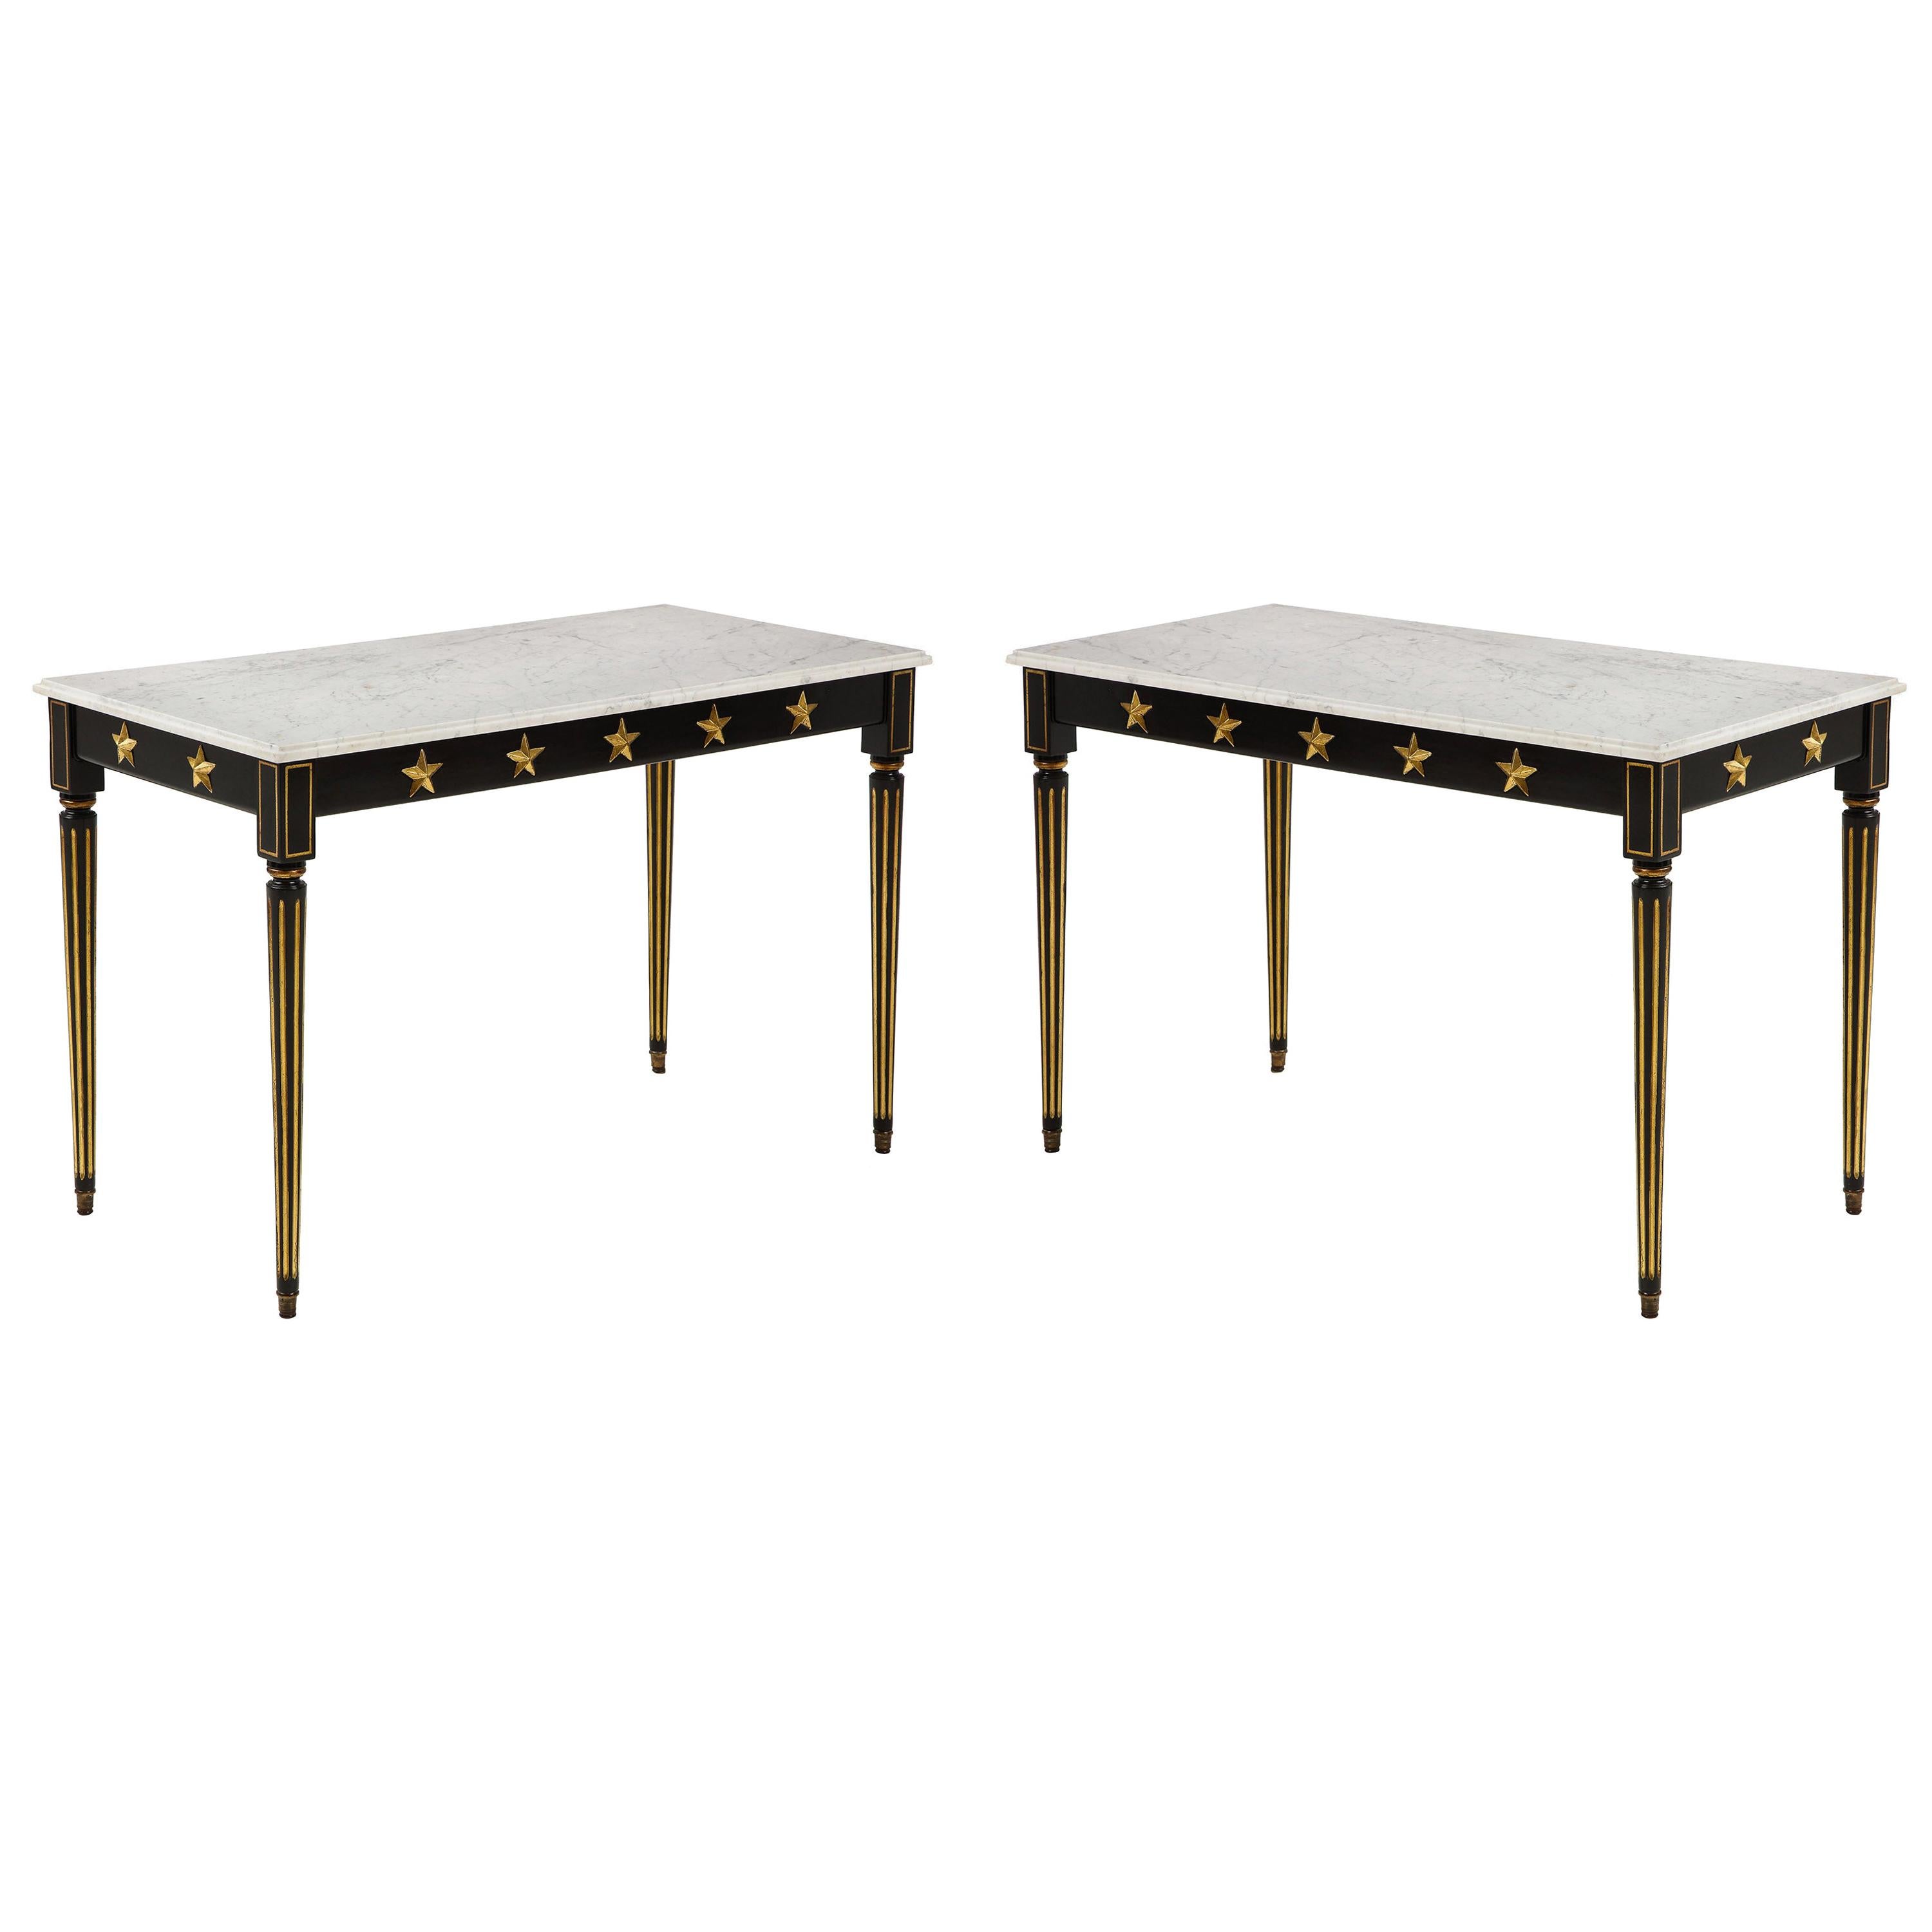 Pair of Marble-Topped Ebonized and Giltwood Consoles, by Jansen